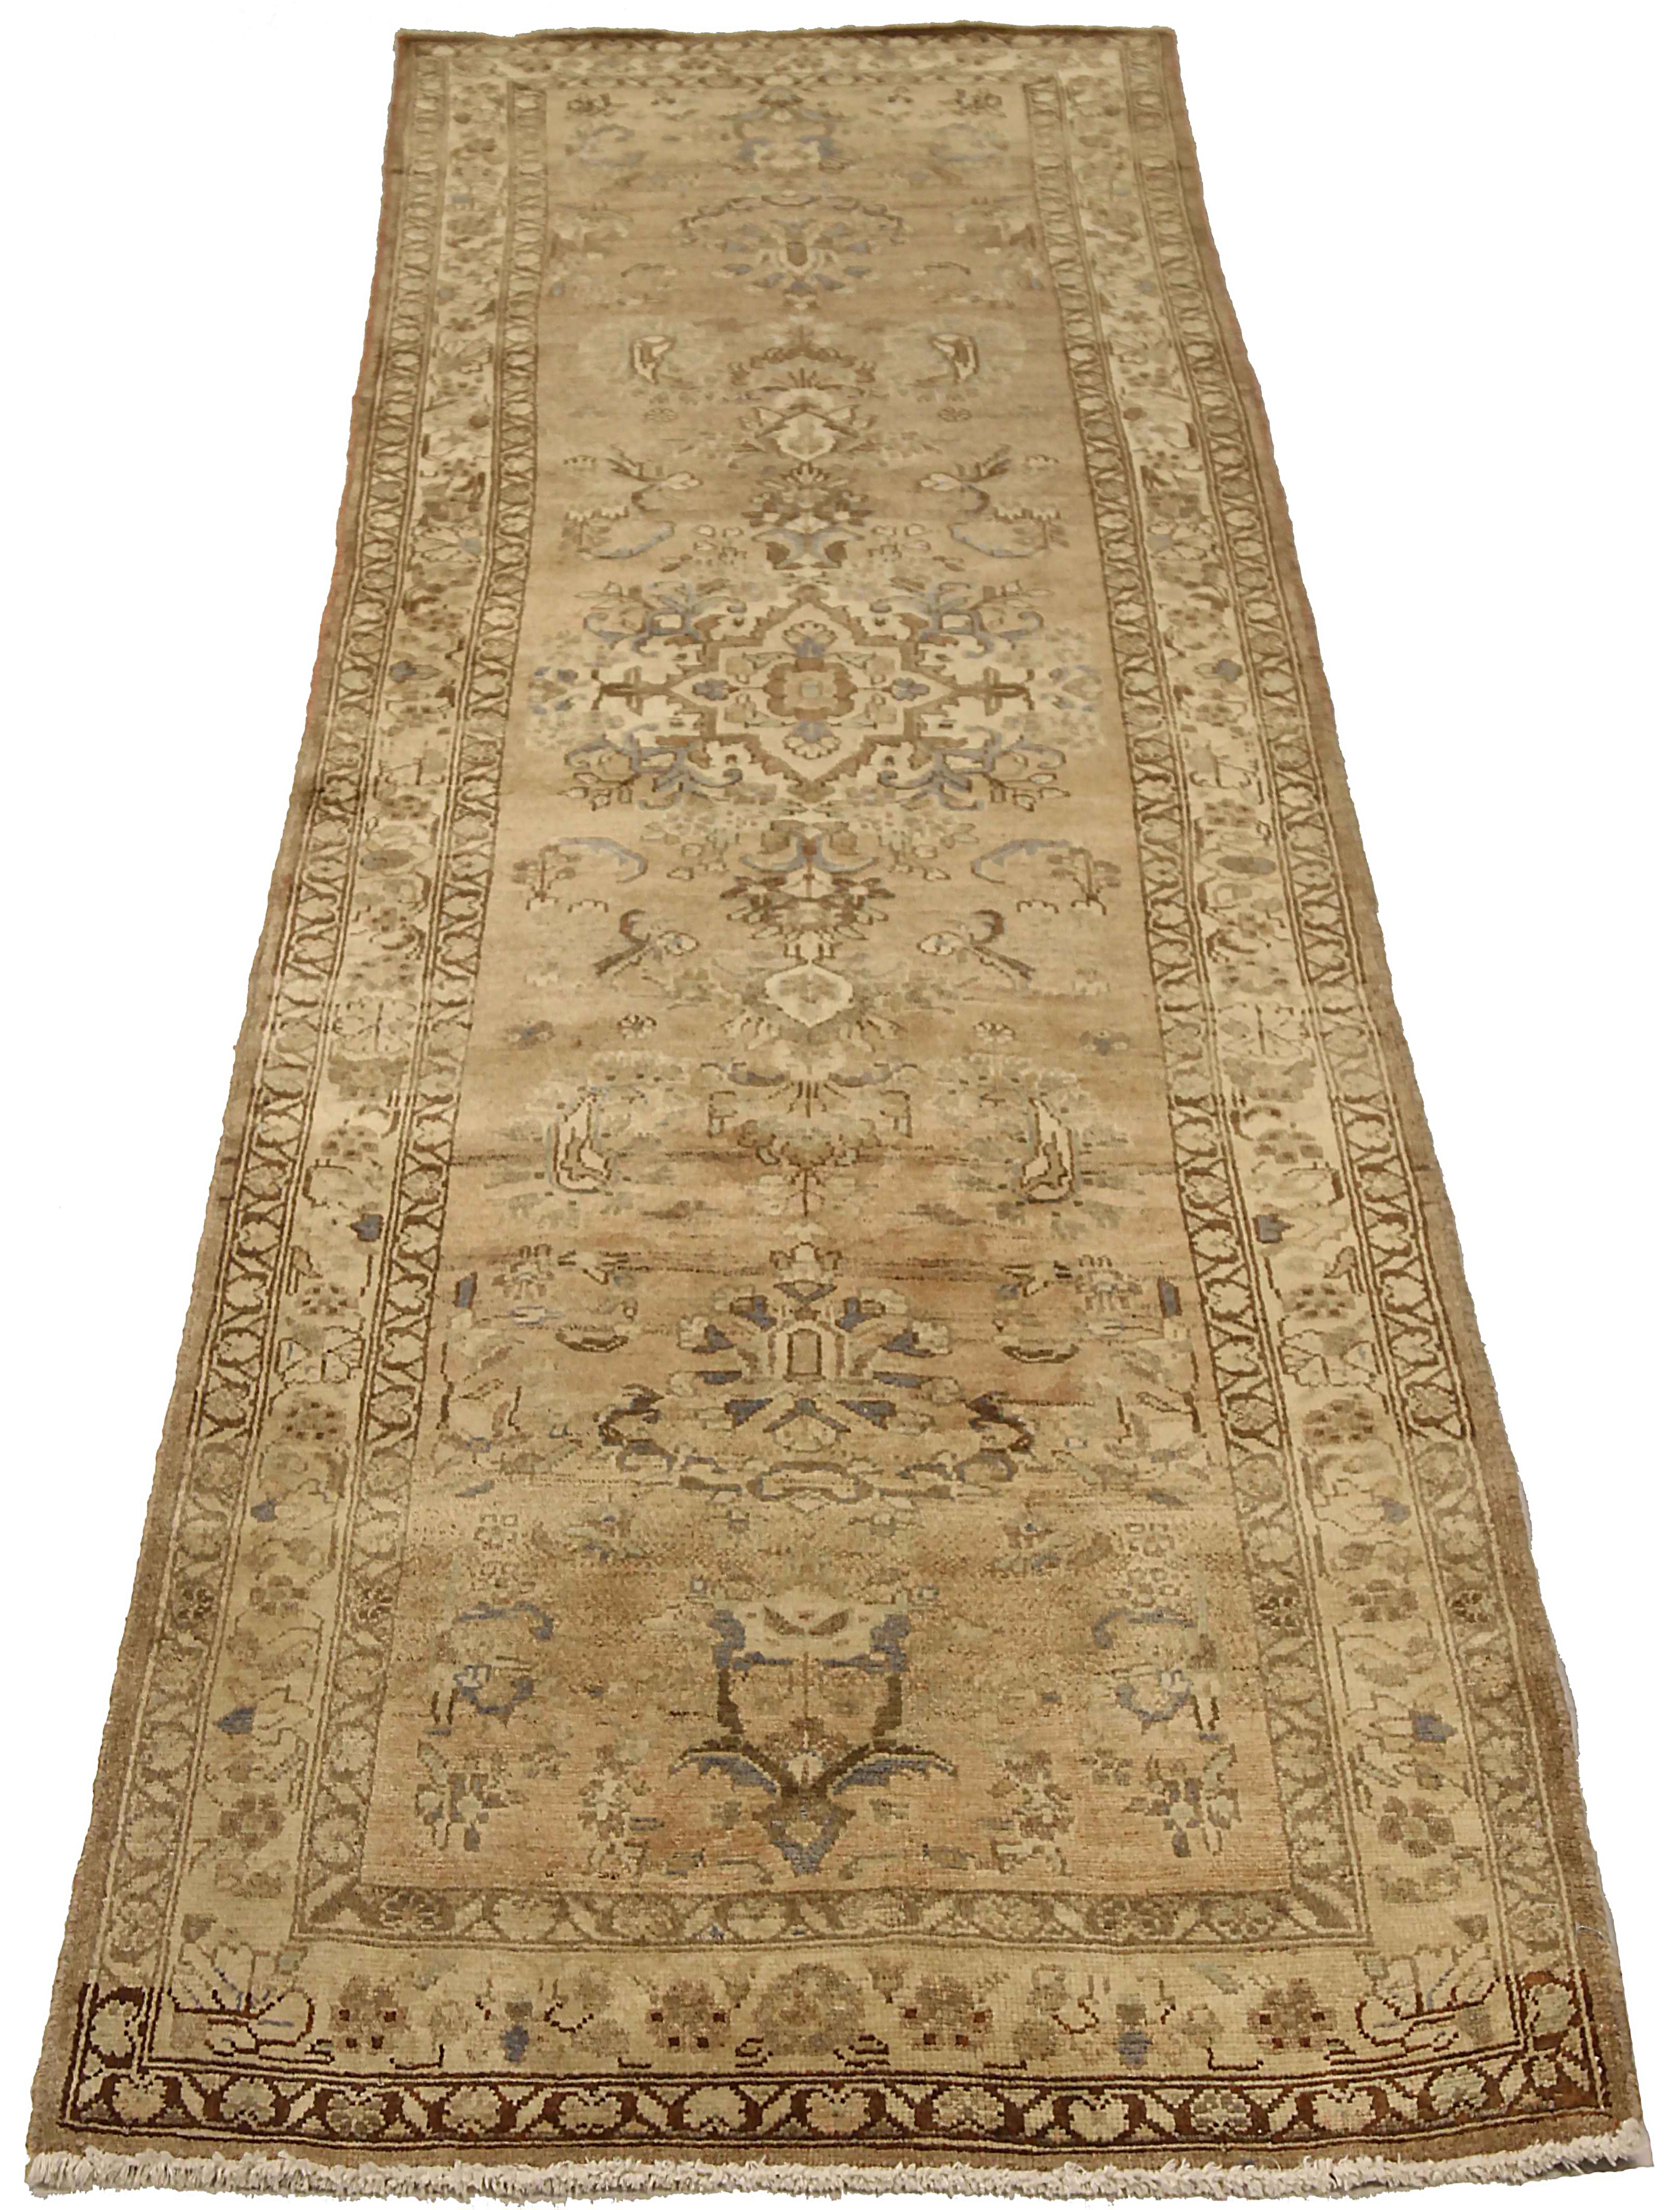 Antique Persian runner rug handwoven from the finest sheep’s wool. It’s colored with all-natural vegetable dyes that are safe for humans and pets. It’s a traditional Malayer design featuring gray and brown floral details on an ivory field. It’s a